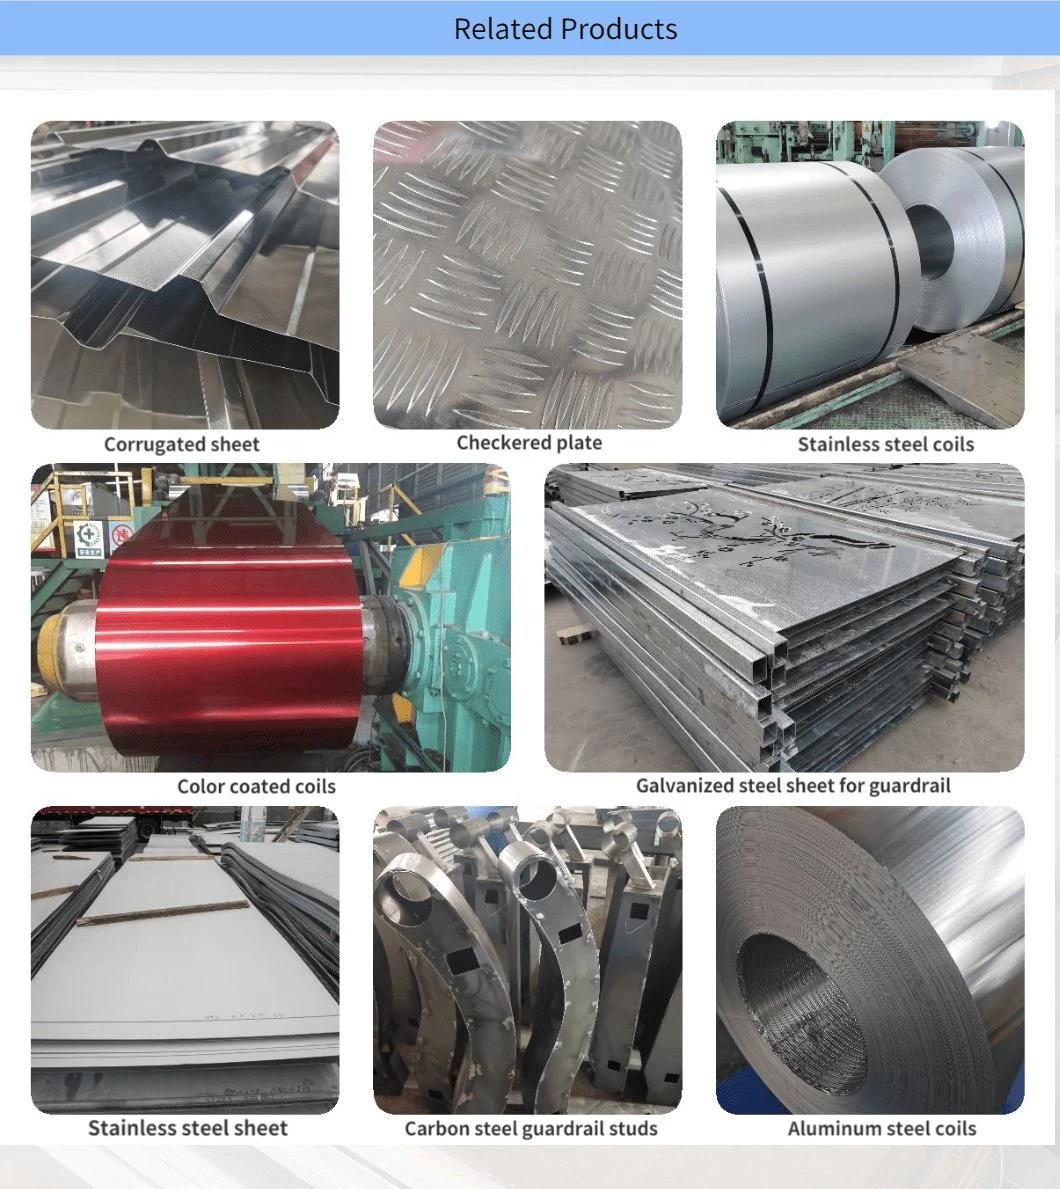 ASTM A36 A36m A515 Grade 55 65 70 P355gh P265gh A709 Gr50 SA516 Gr60 Alloy Carbon Mild High Strength Pressure Vessel Steel Plate Boiler Sheet for Container